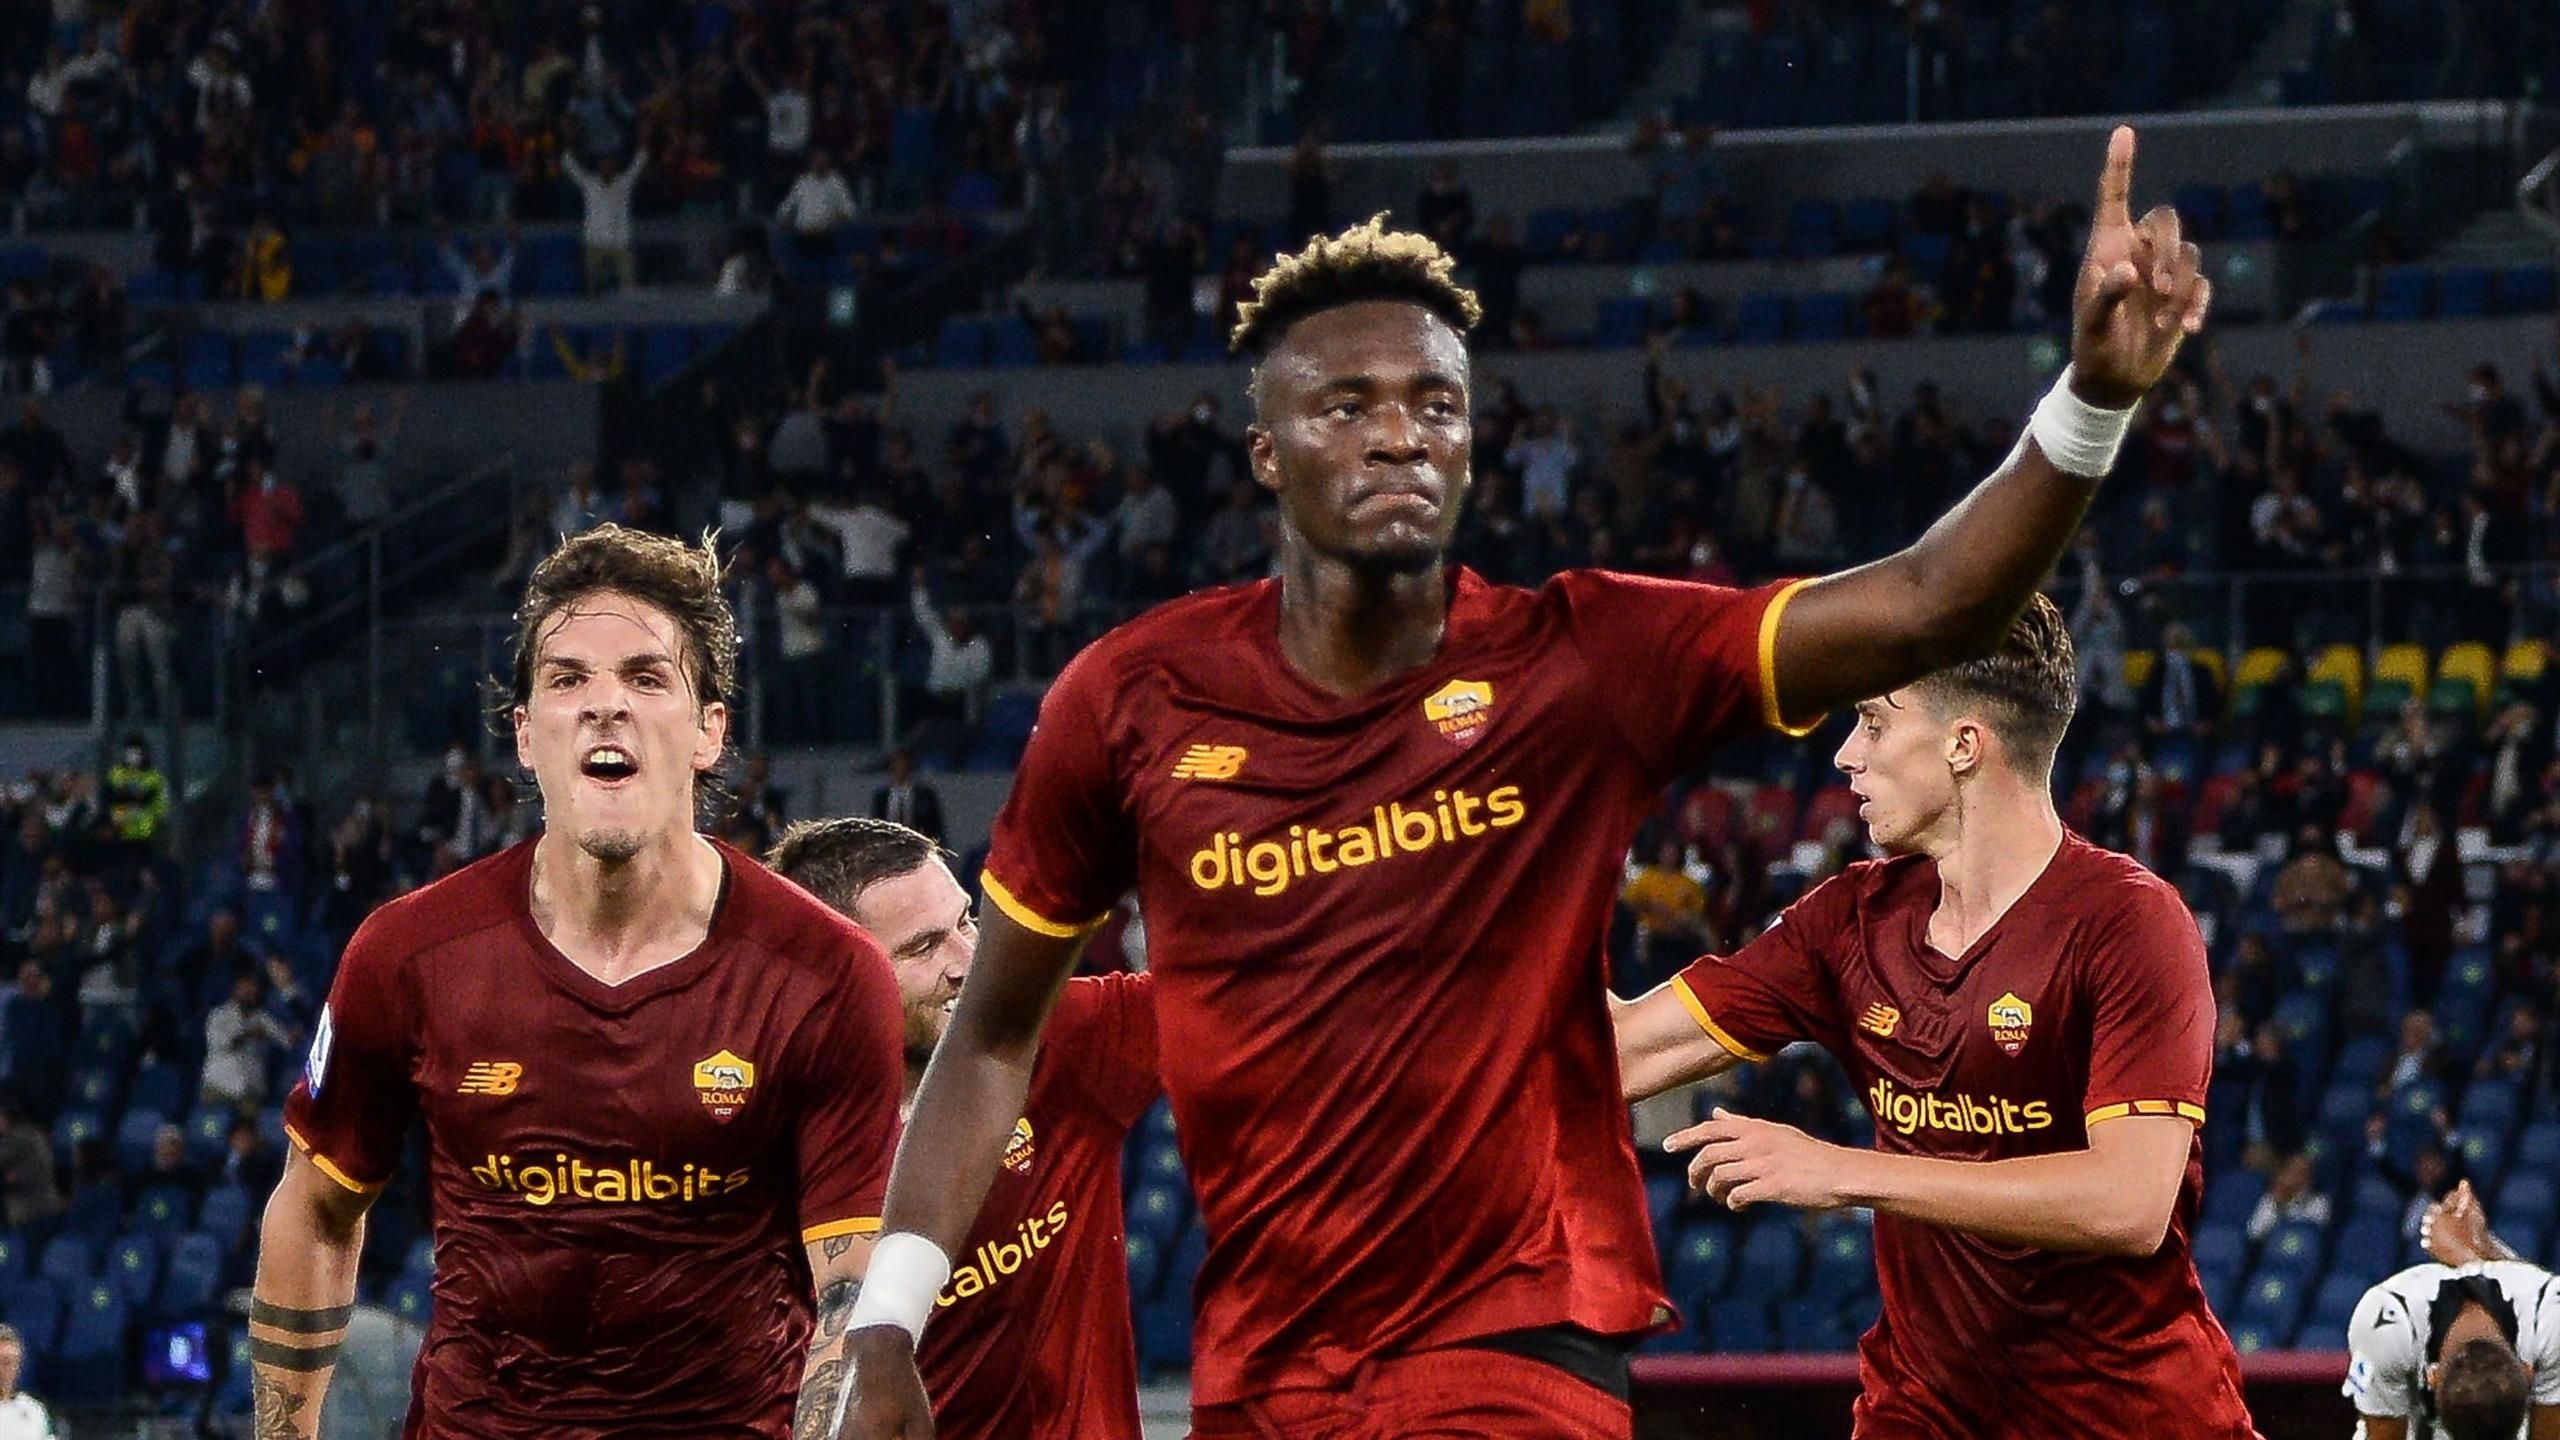 Tammy Abraham and Roma are rolling after Udinese win sends them fourth in Serie A table - The Warm-Up - Eurosport